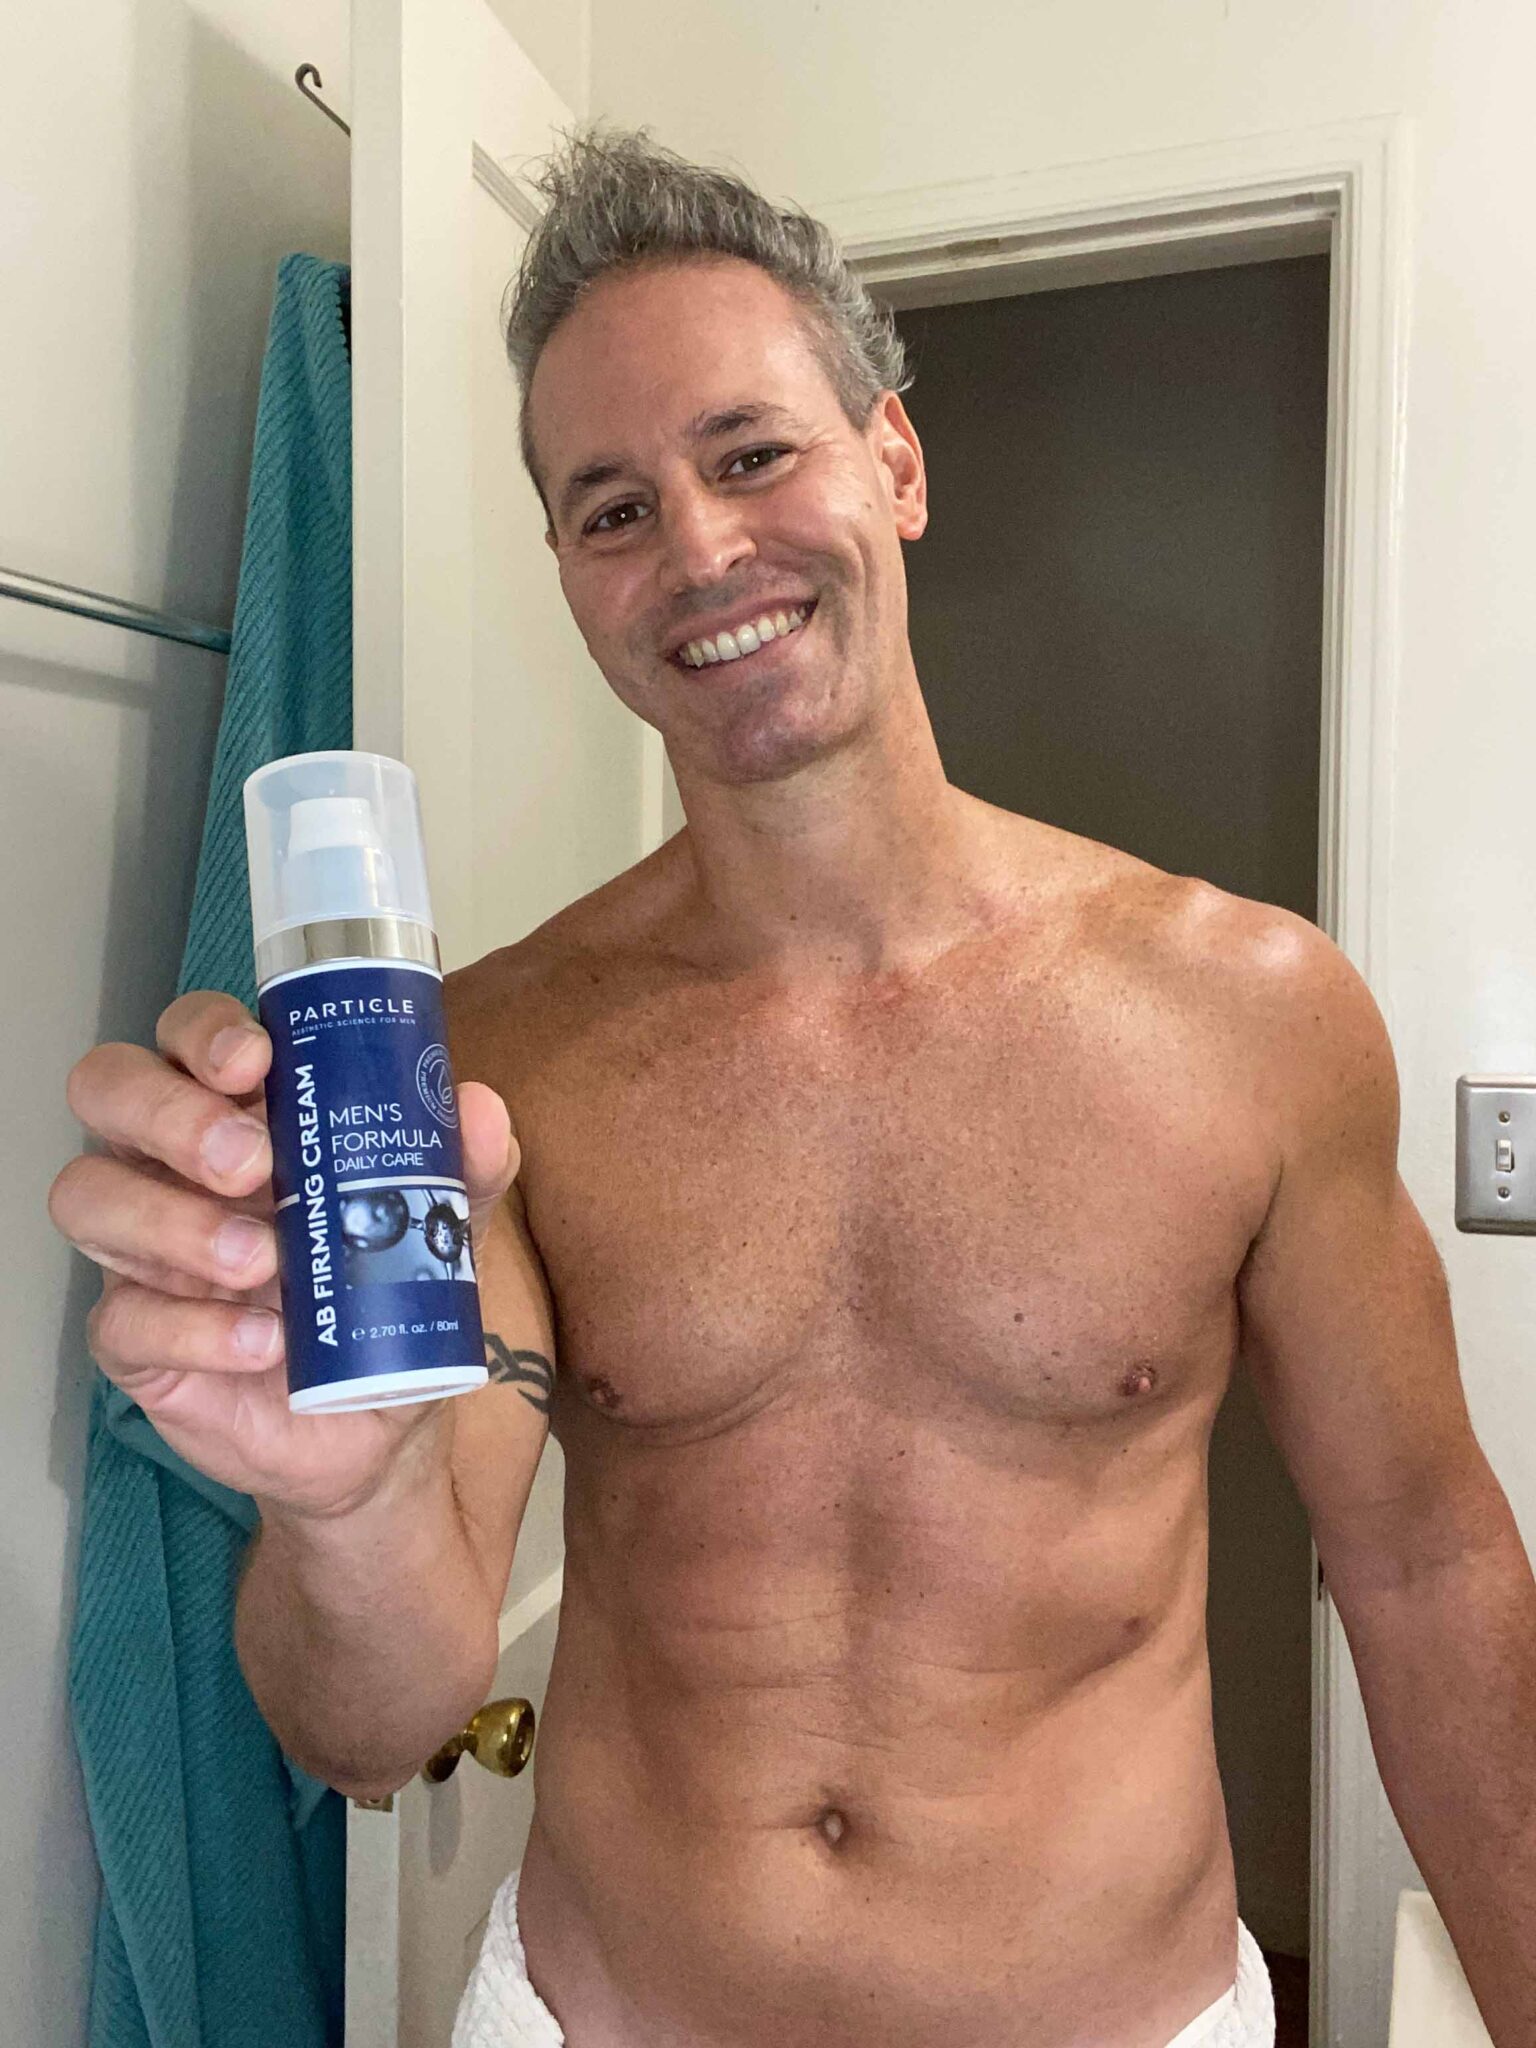 A man holding a bottle of Particle AB Firming Cream Men's Formula Daily Care.